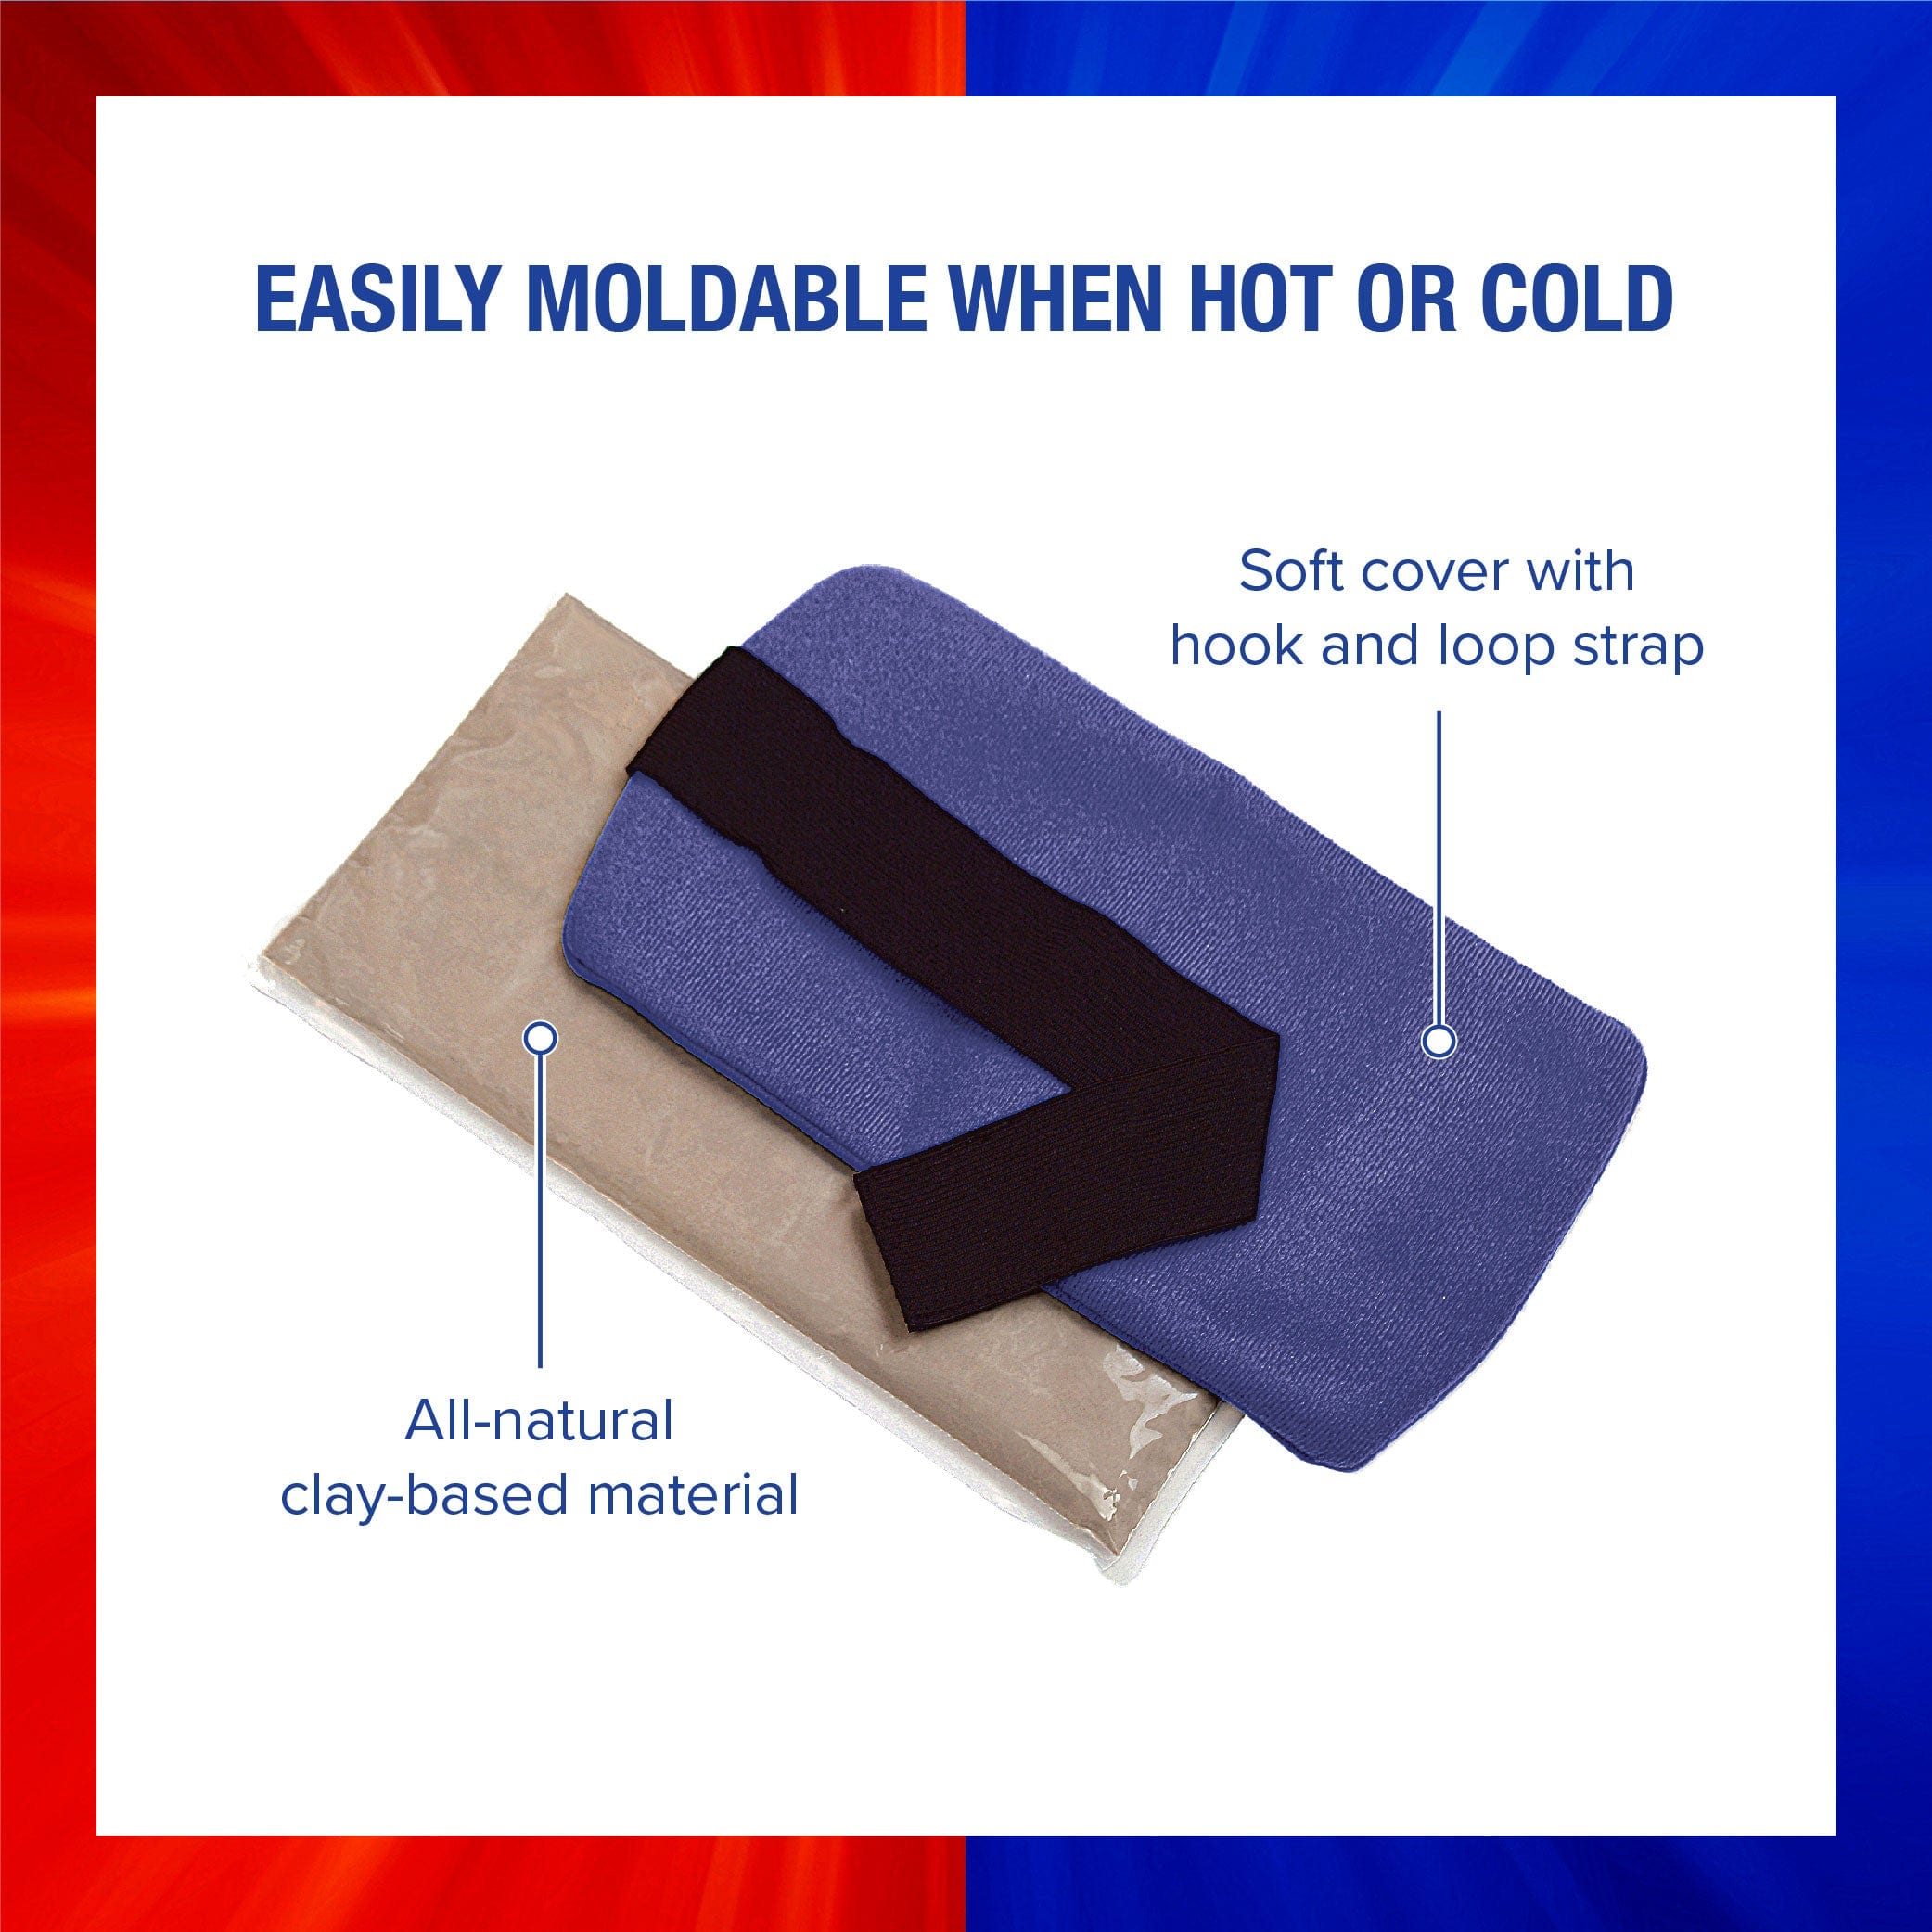 ThermiPaq Hot/Cold Pain Relief Wrap - Easily moldable when hot or cold - Soft cover with hood and loop strap - All natural clay-based material